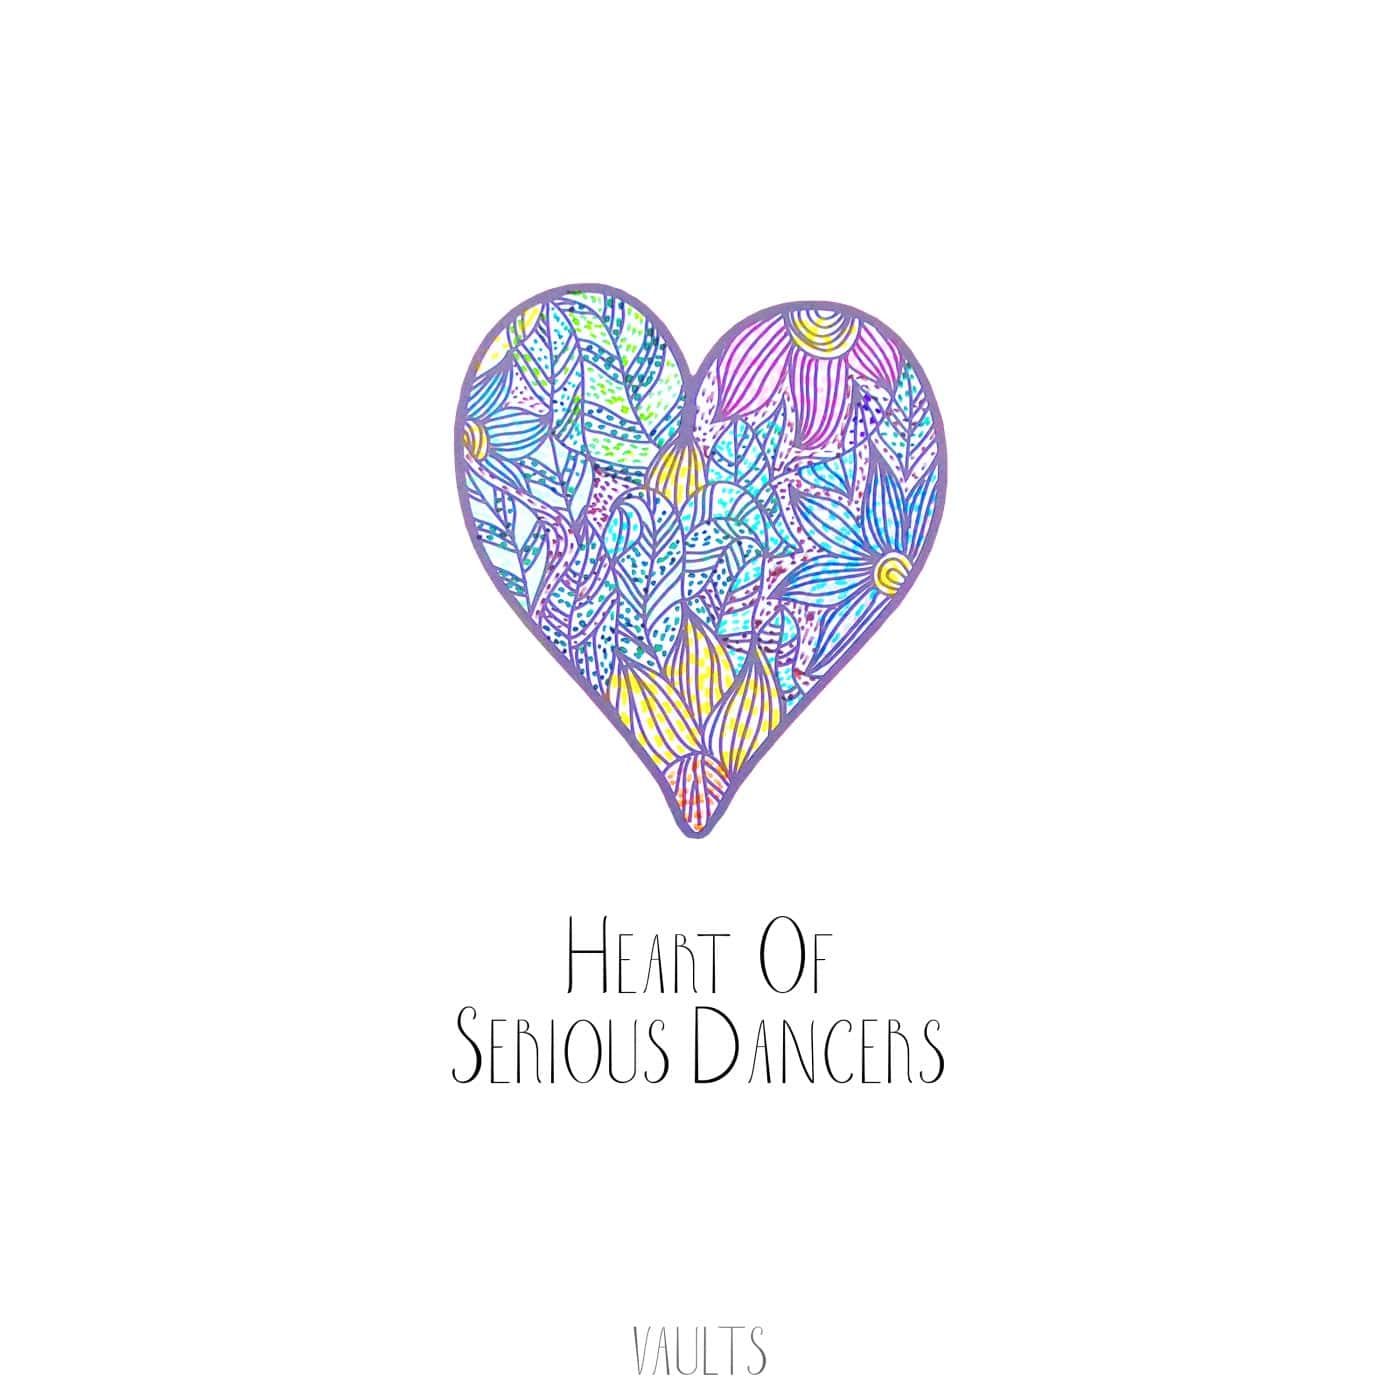 Download Serious Dancers - Heart Of on Electrobuzz